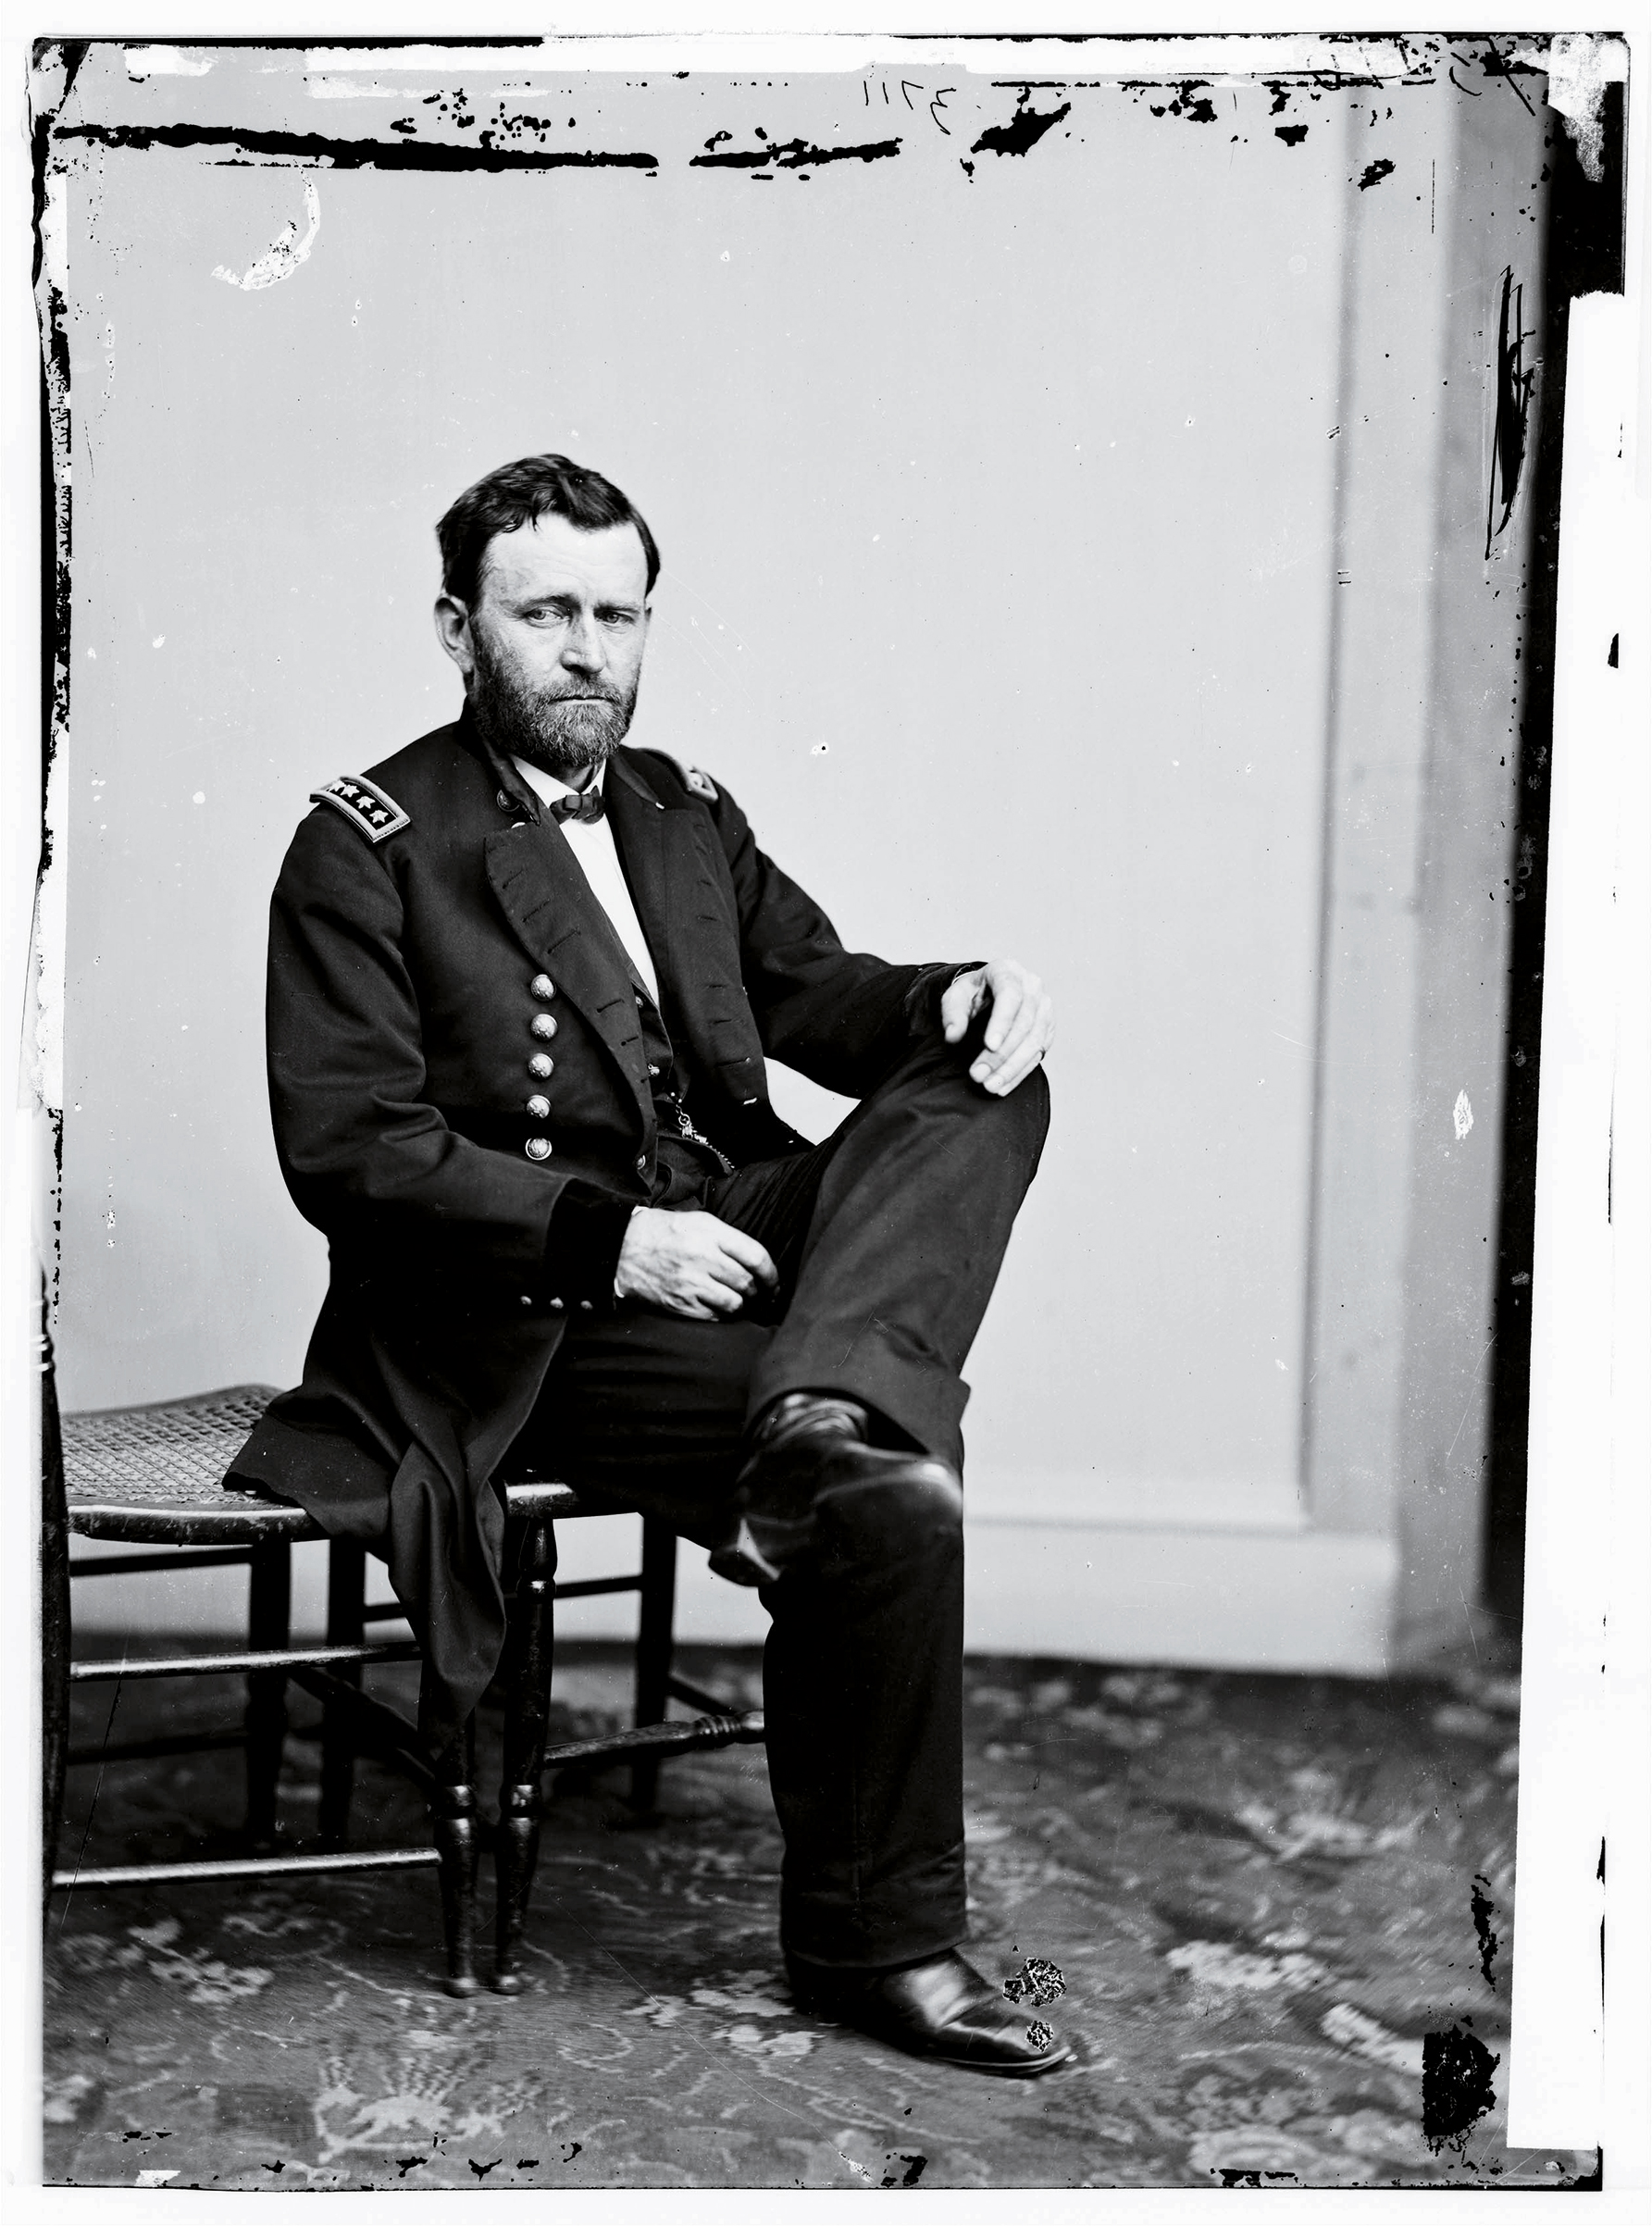 Ulysses S. Grant, circa 1865, before his rise to the White House. (APIC/Getty Images)